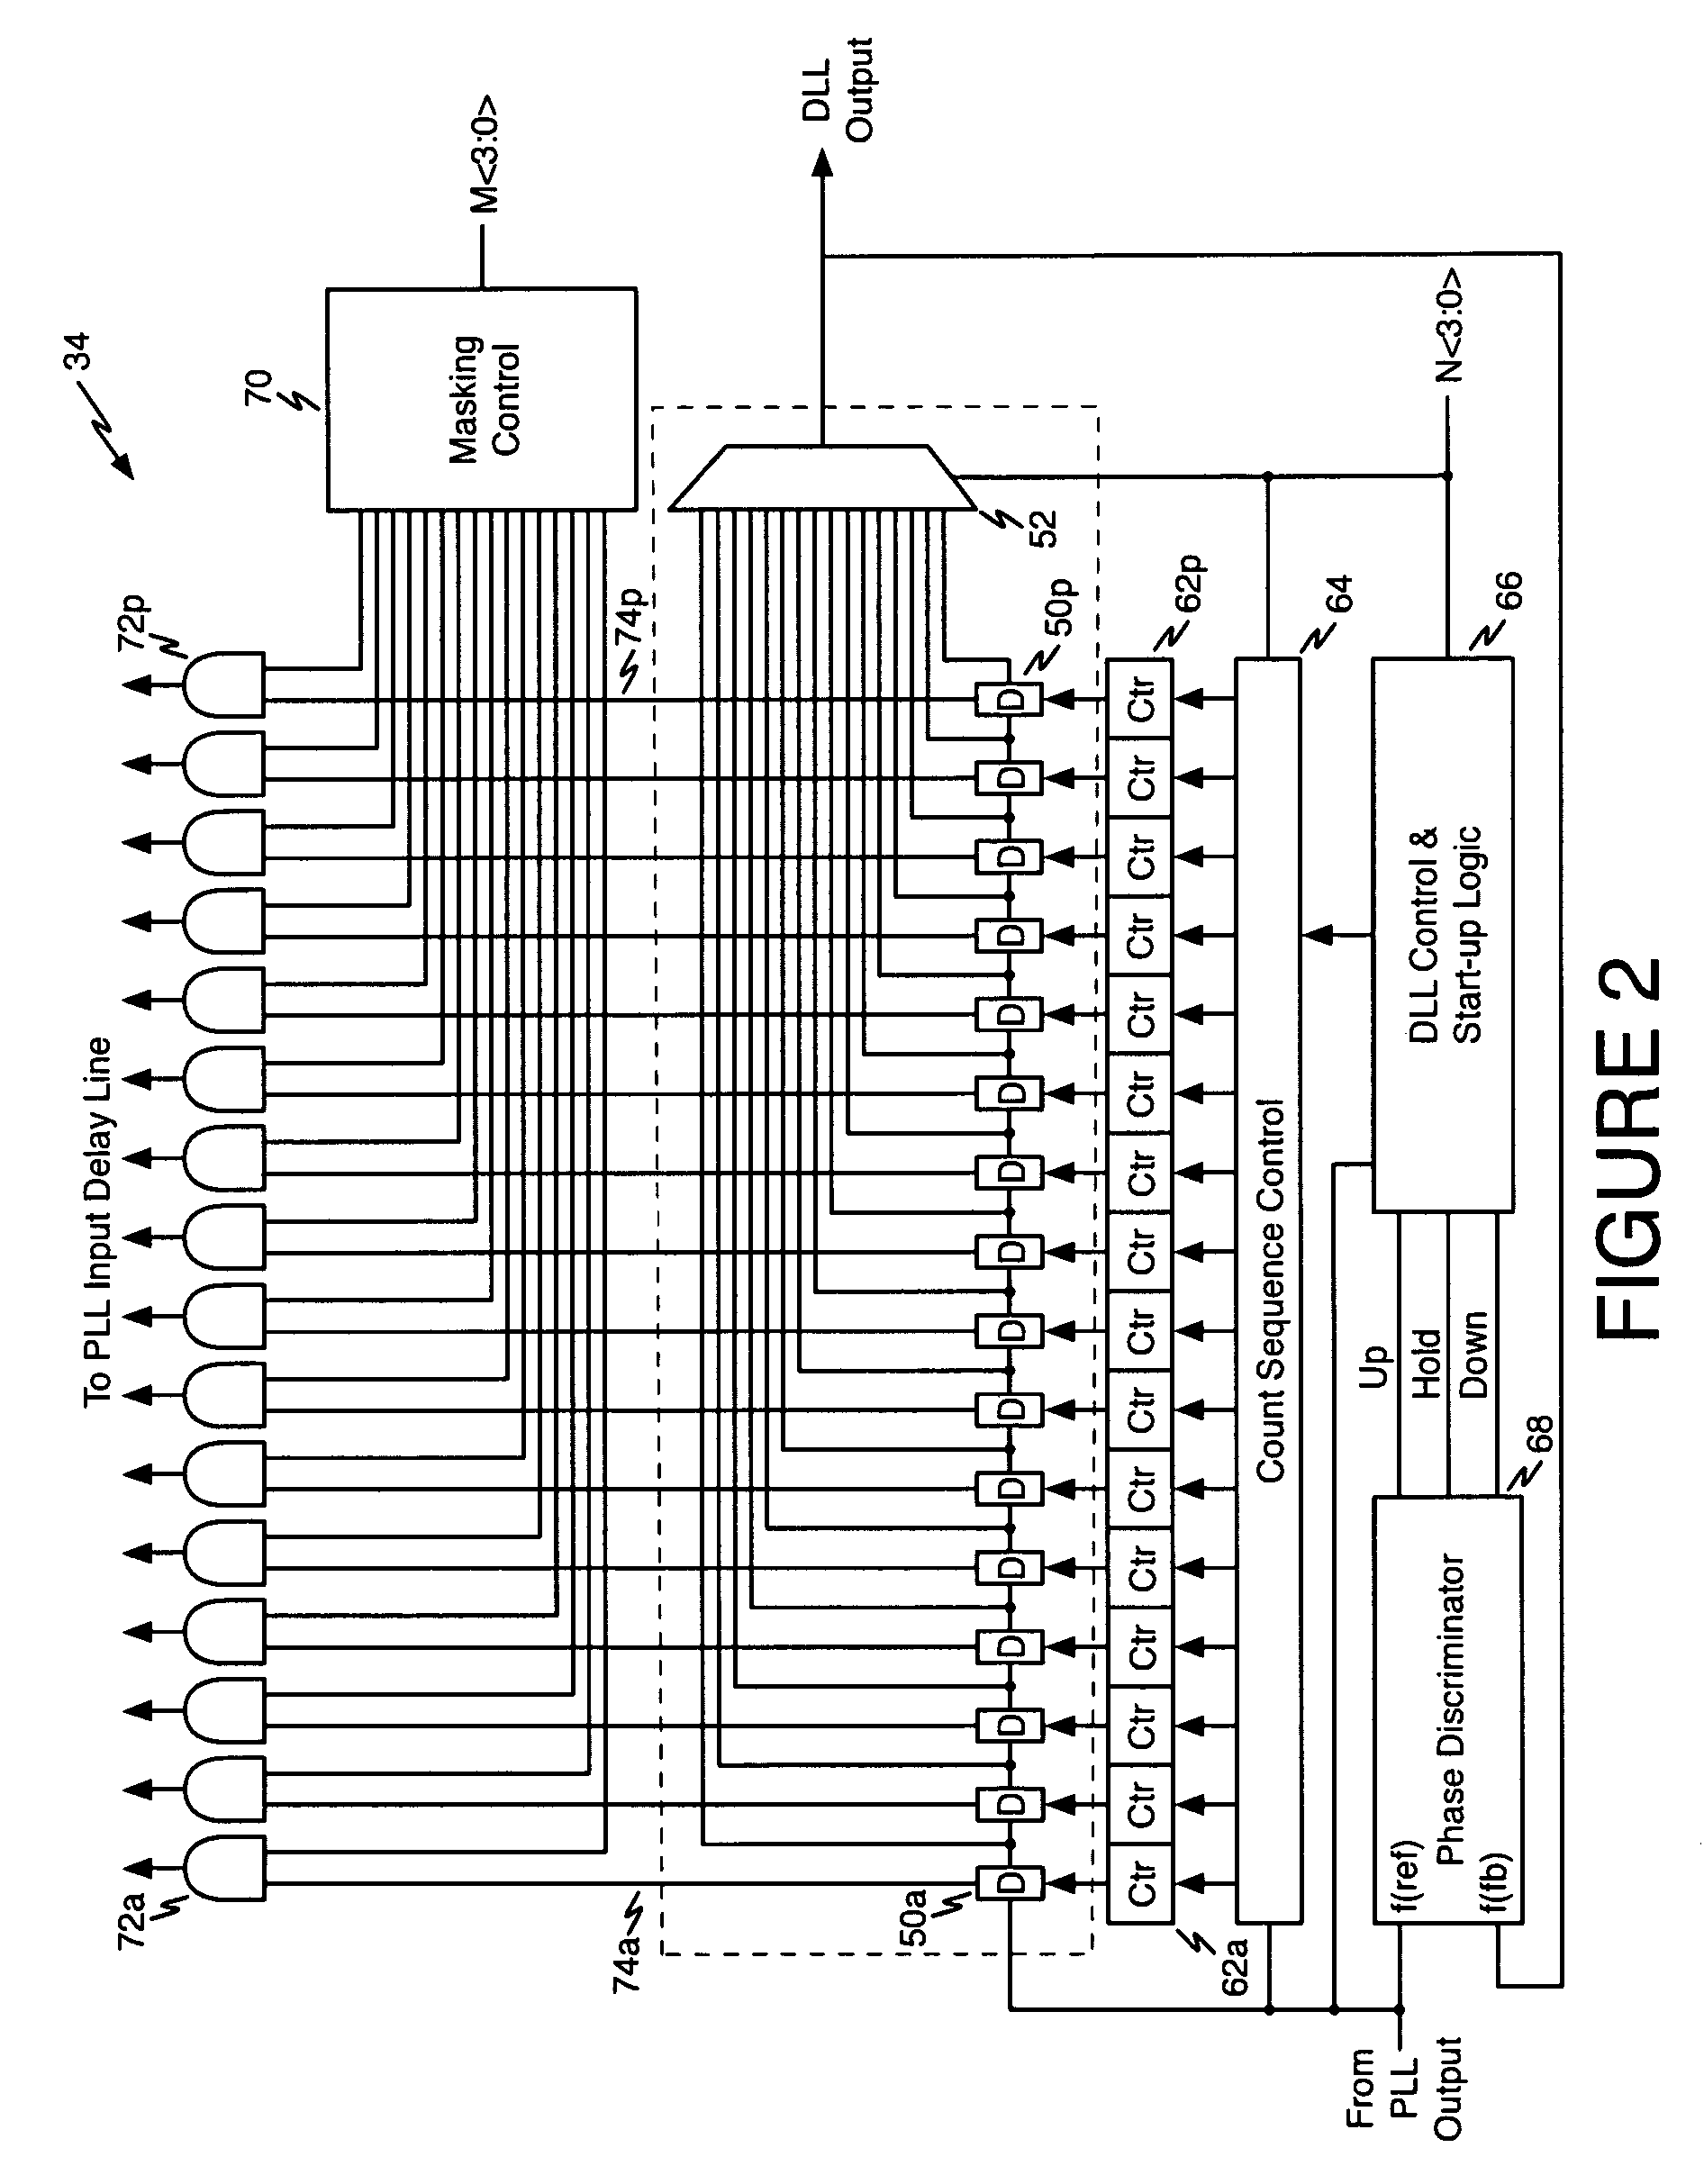 Programmable delay line compensated for process, voltage, and temperature